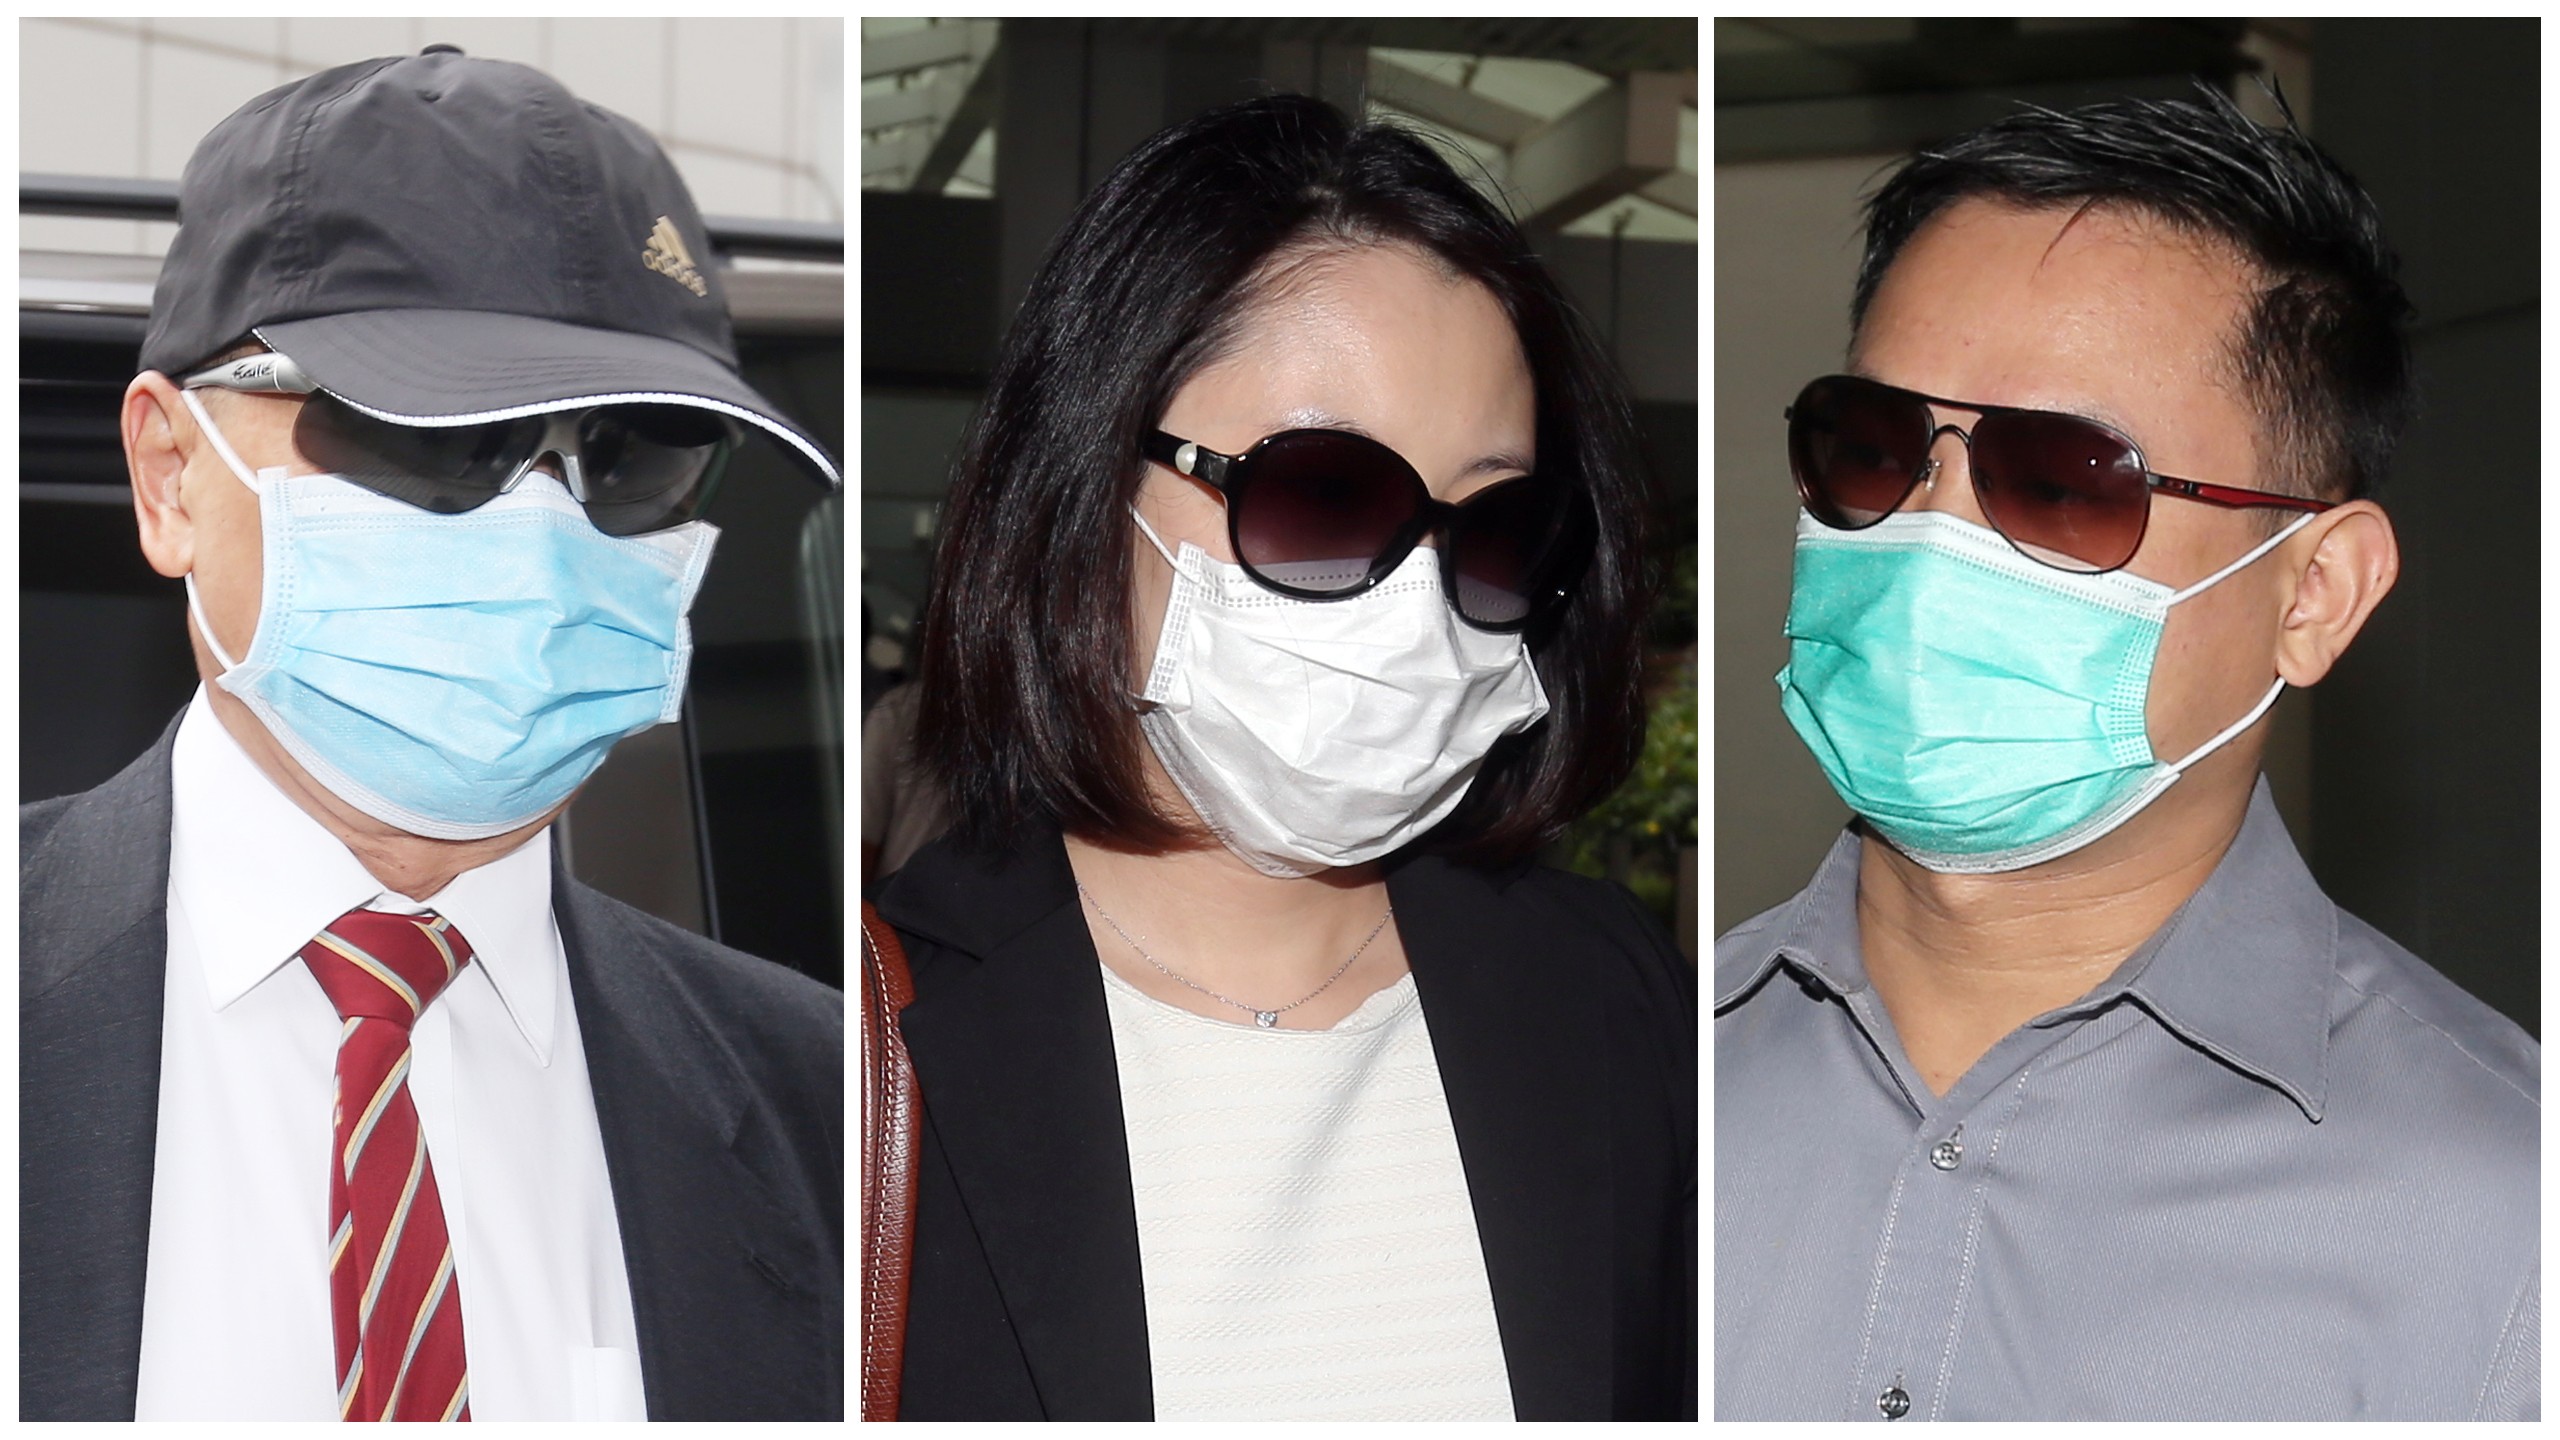 The defendants (from left) Dr Stephen Chow, Mak Wan-ling and Chan Kwun-chung. Photo: K. Y. Cheng